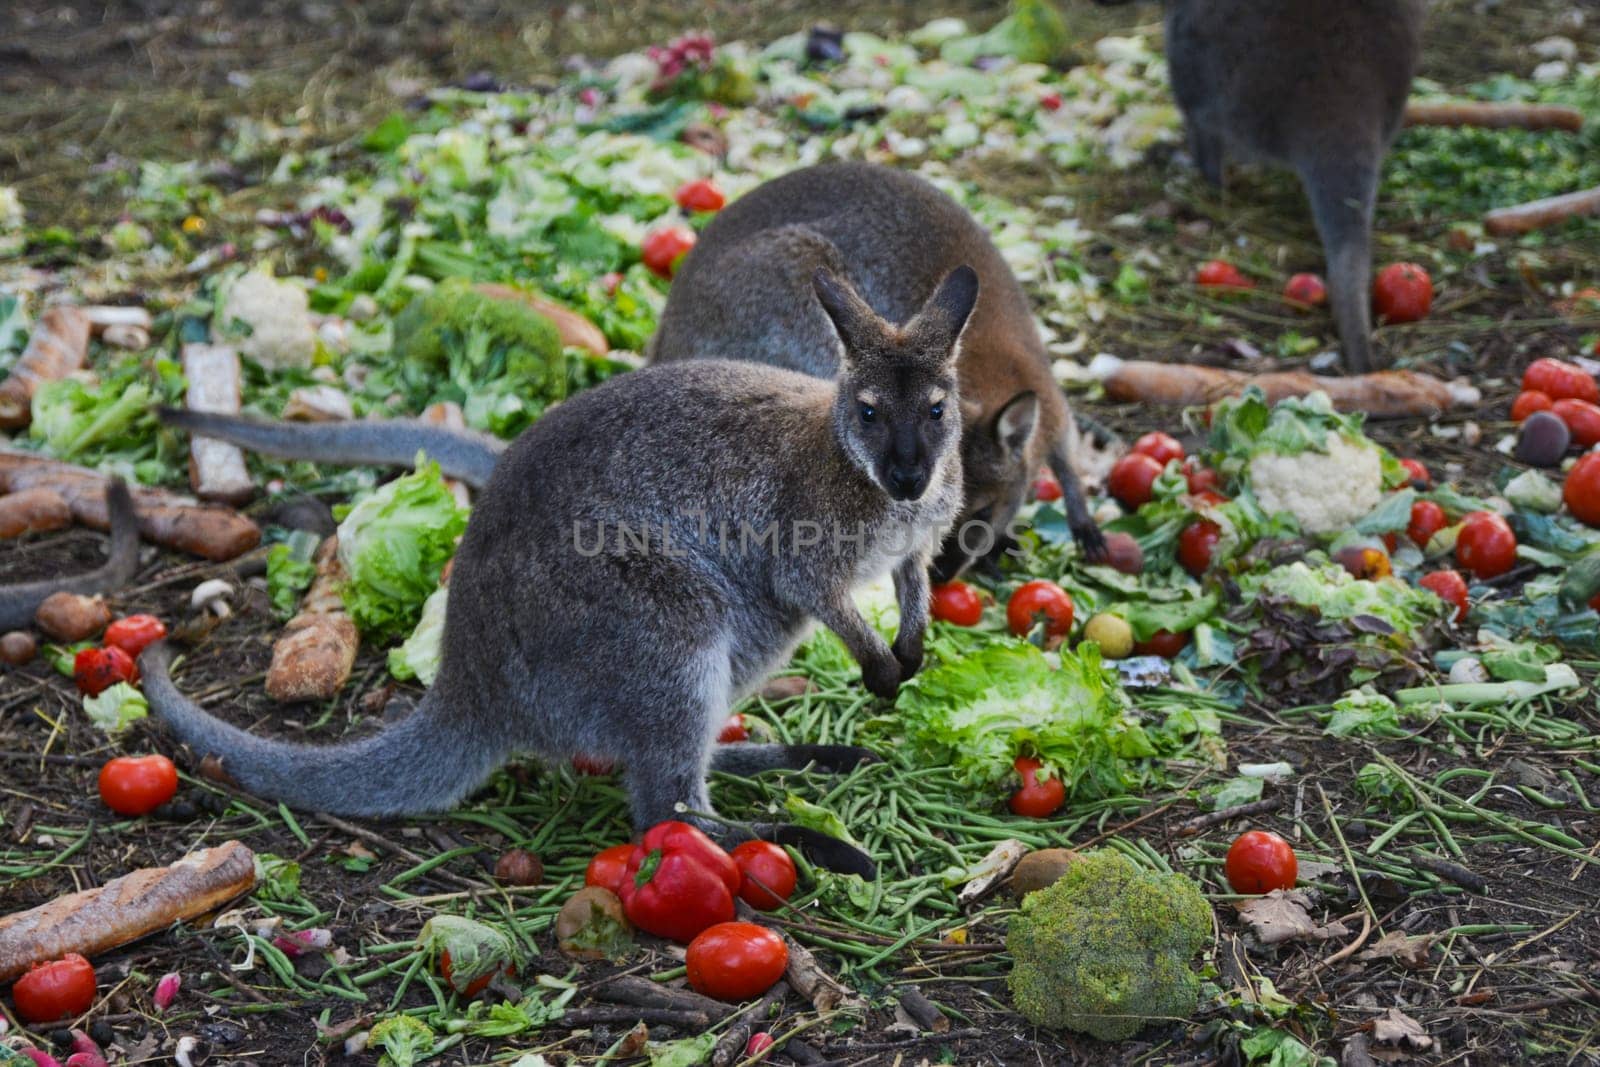 Kangaroo eating vegetables and bread in a zoo